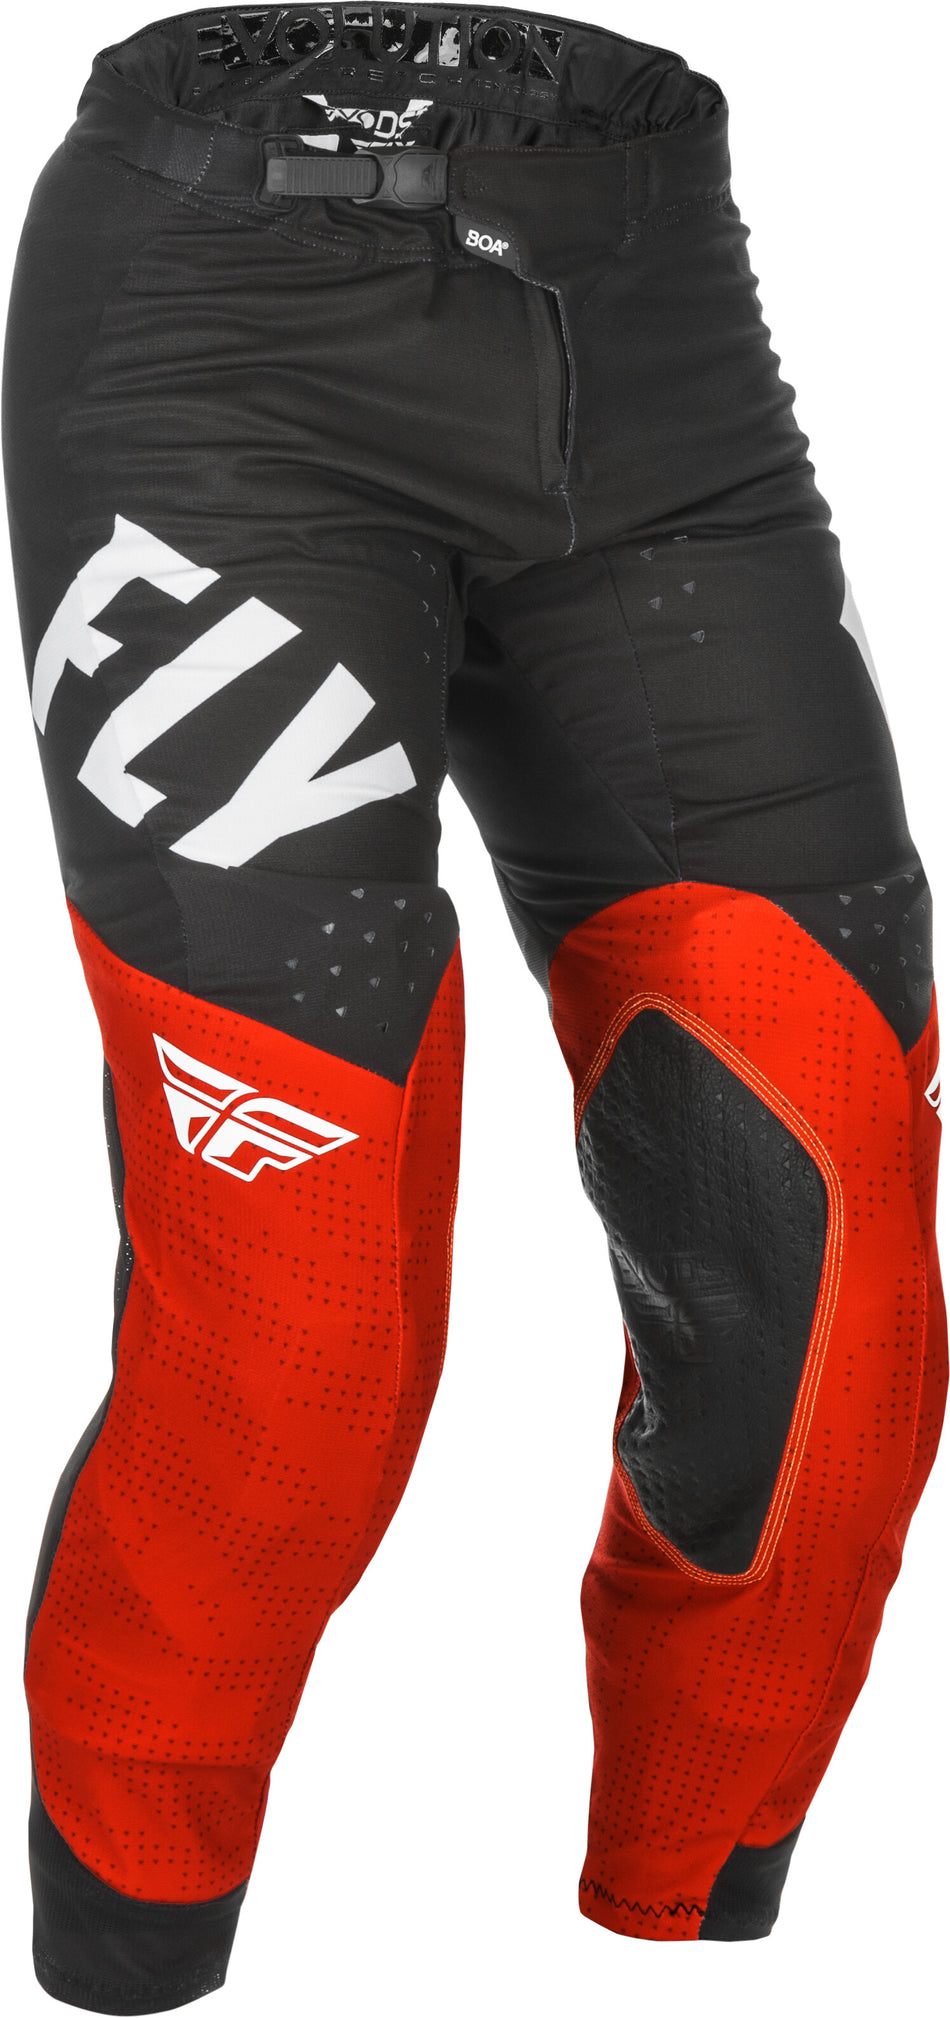 FLY RACING Evolution Dst Pants Red/Black/White Sz 38 374-13238